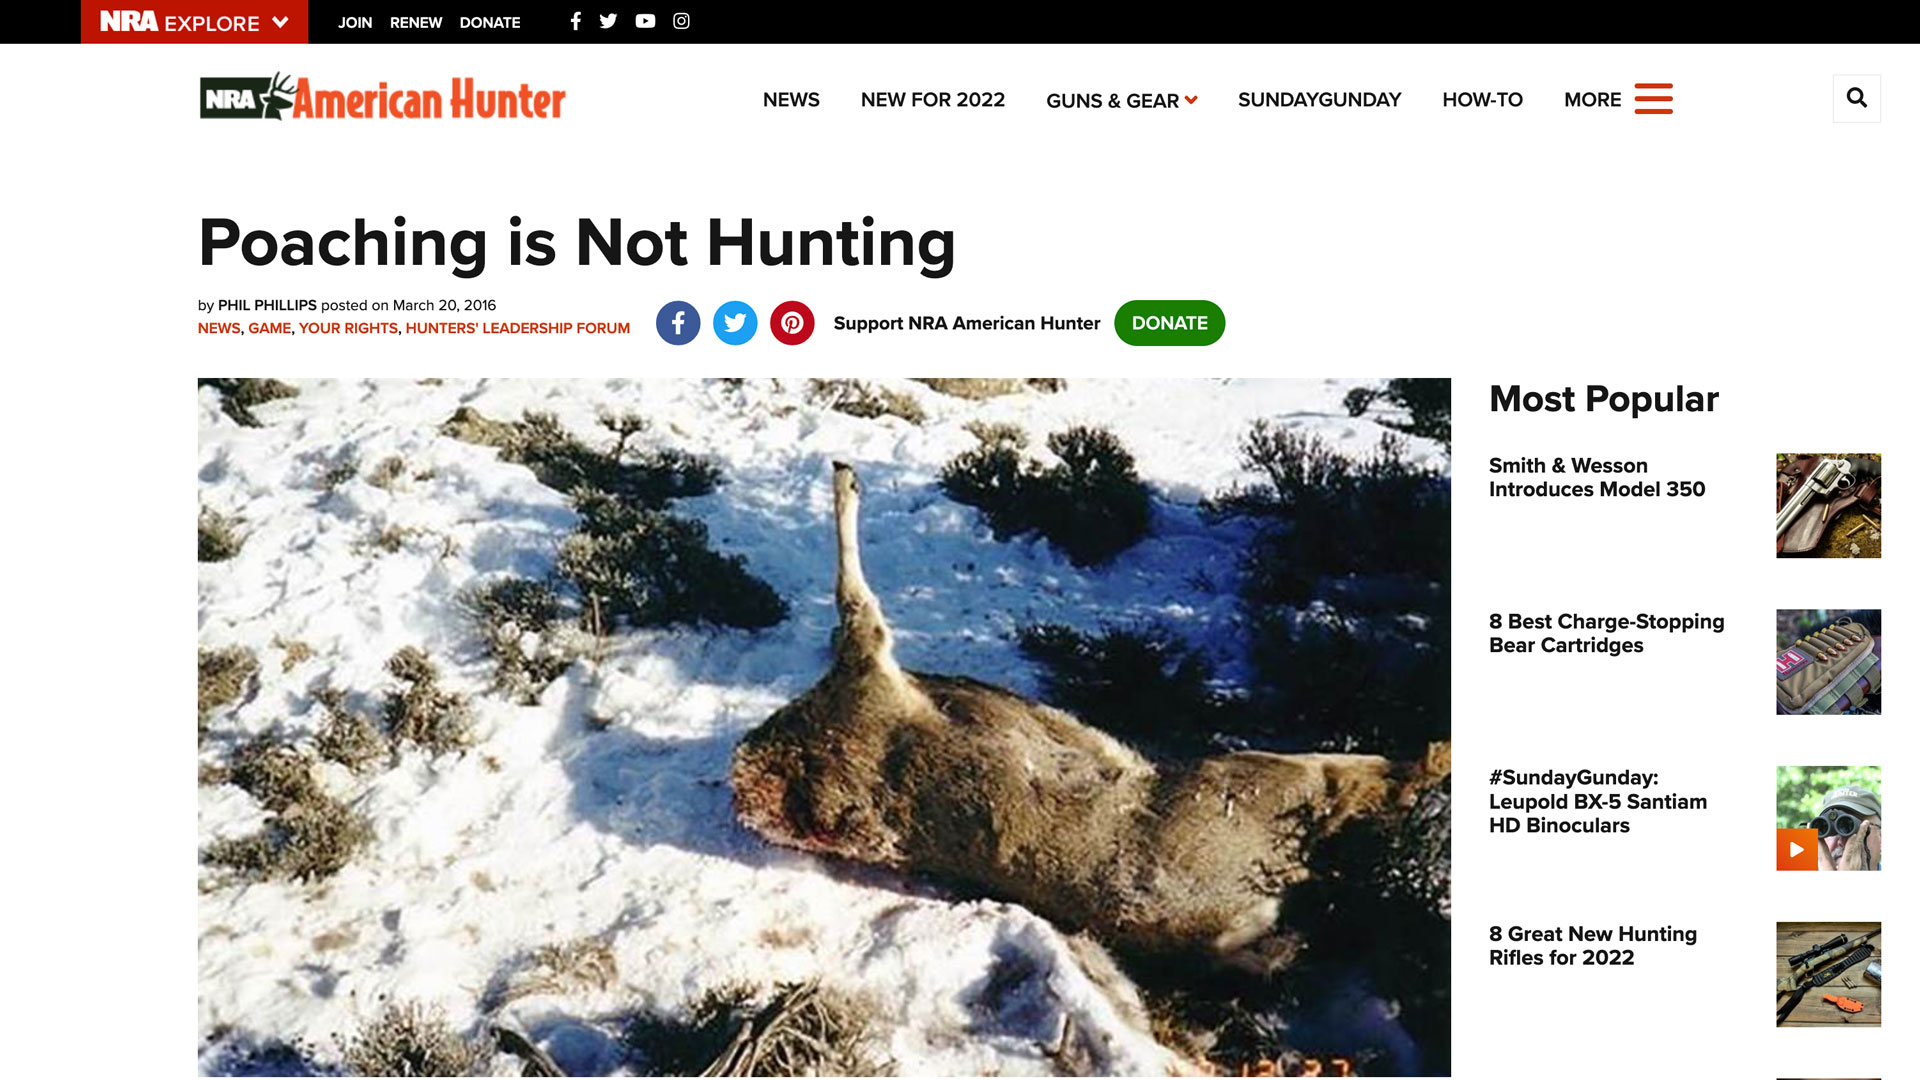 screen grab of american hunter story explaining why poaching is not hunting